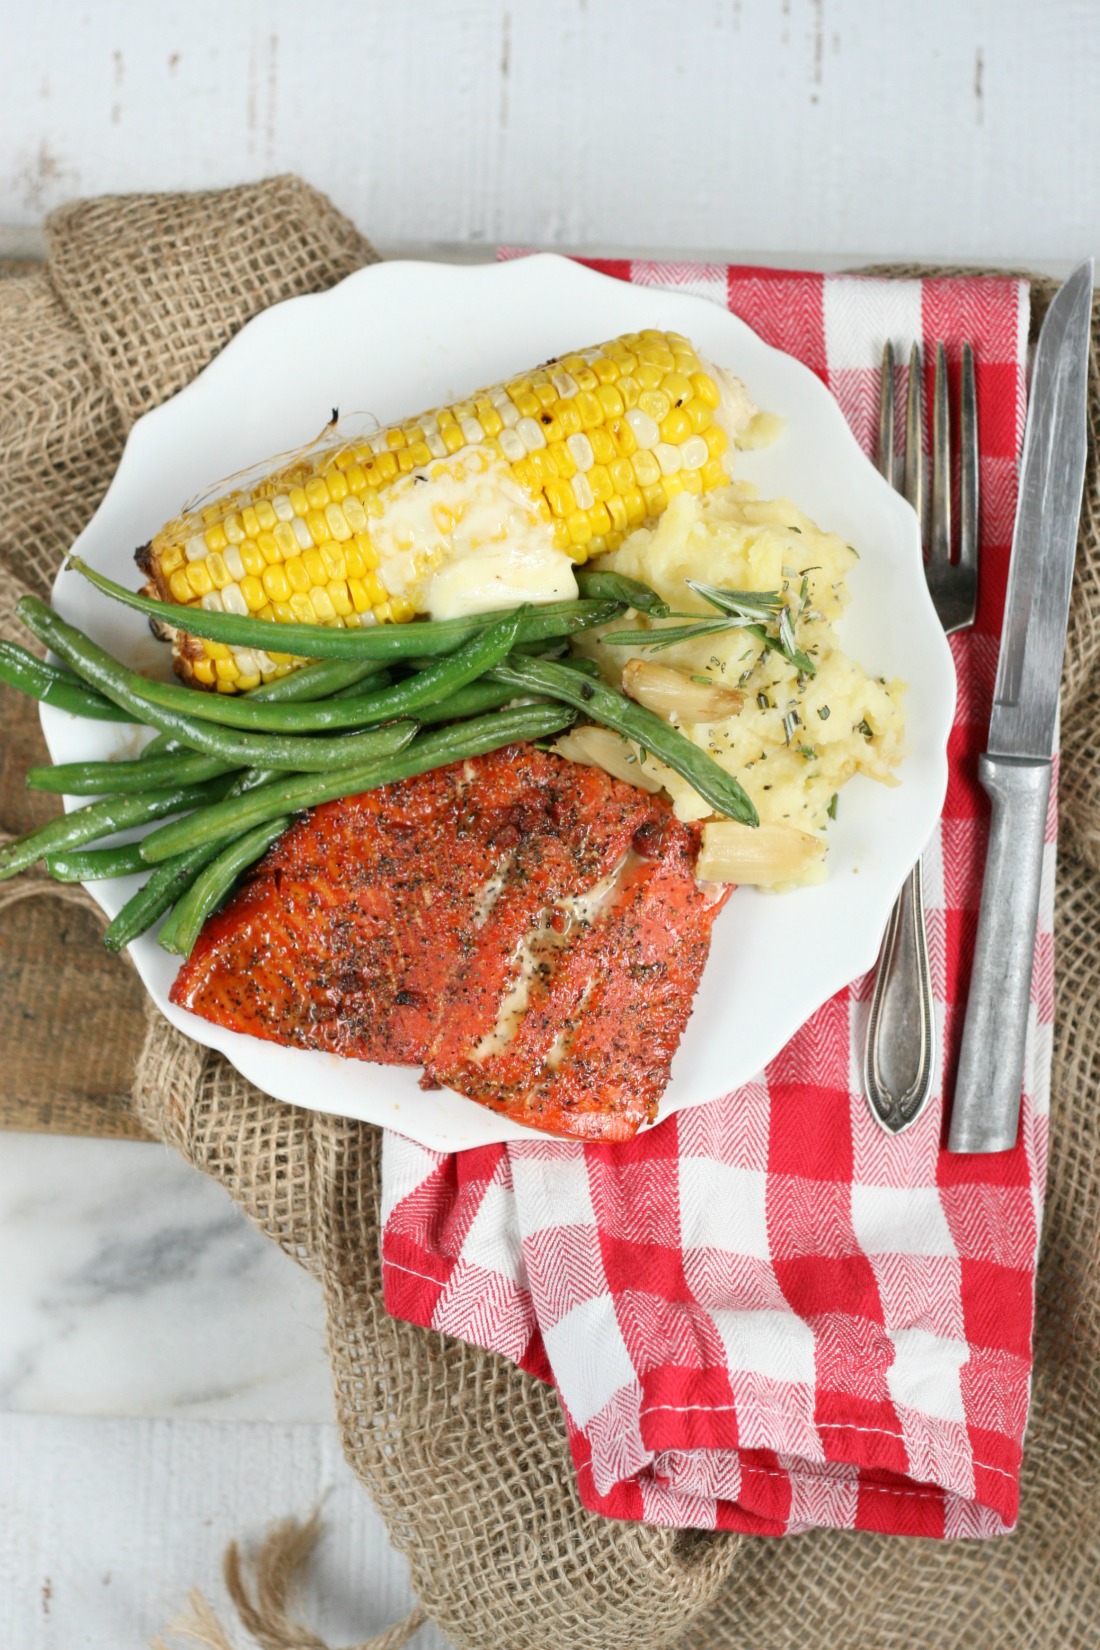 Piece of Wild Salmon with maple bacon spice rub, grilled corn on the cobb, fresh green beans and roasted garlic rosemary mashed potatoes